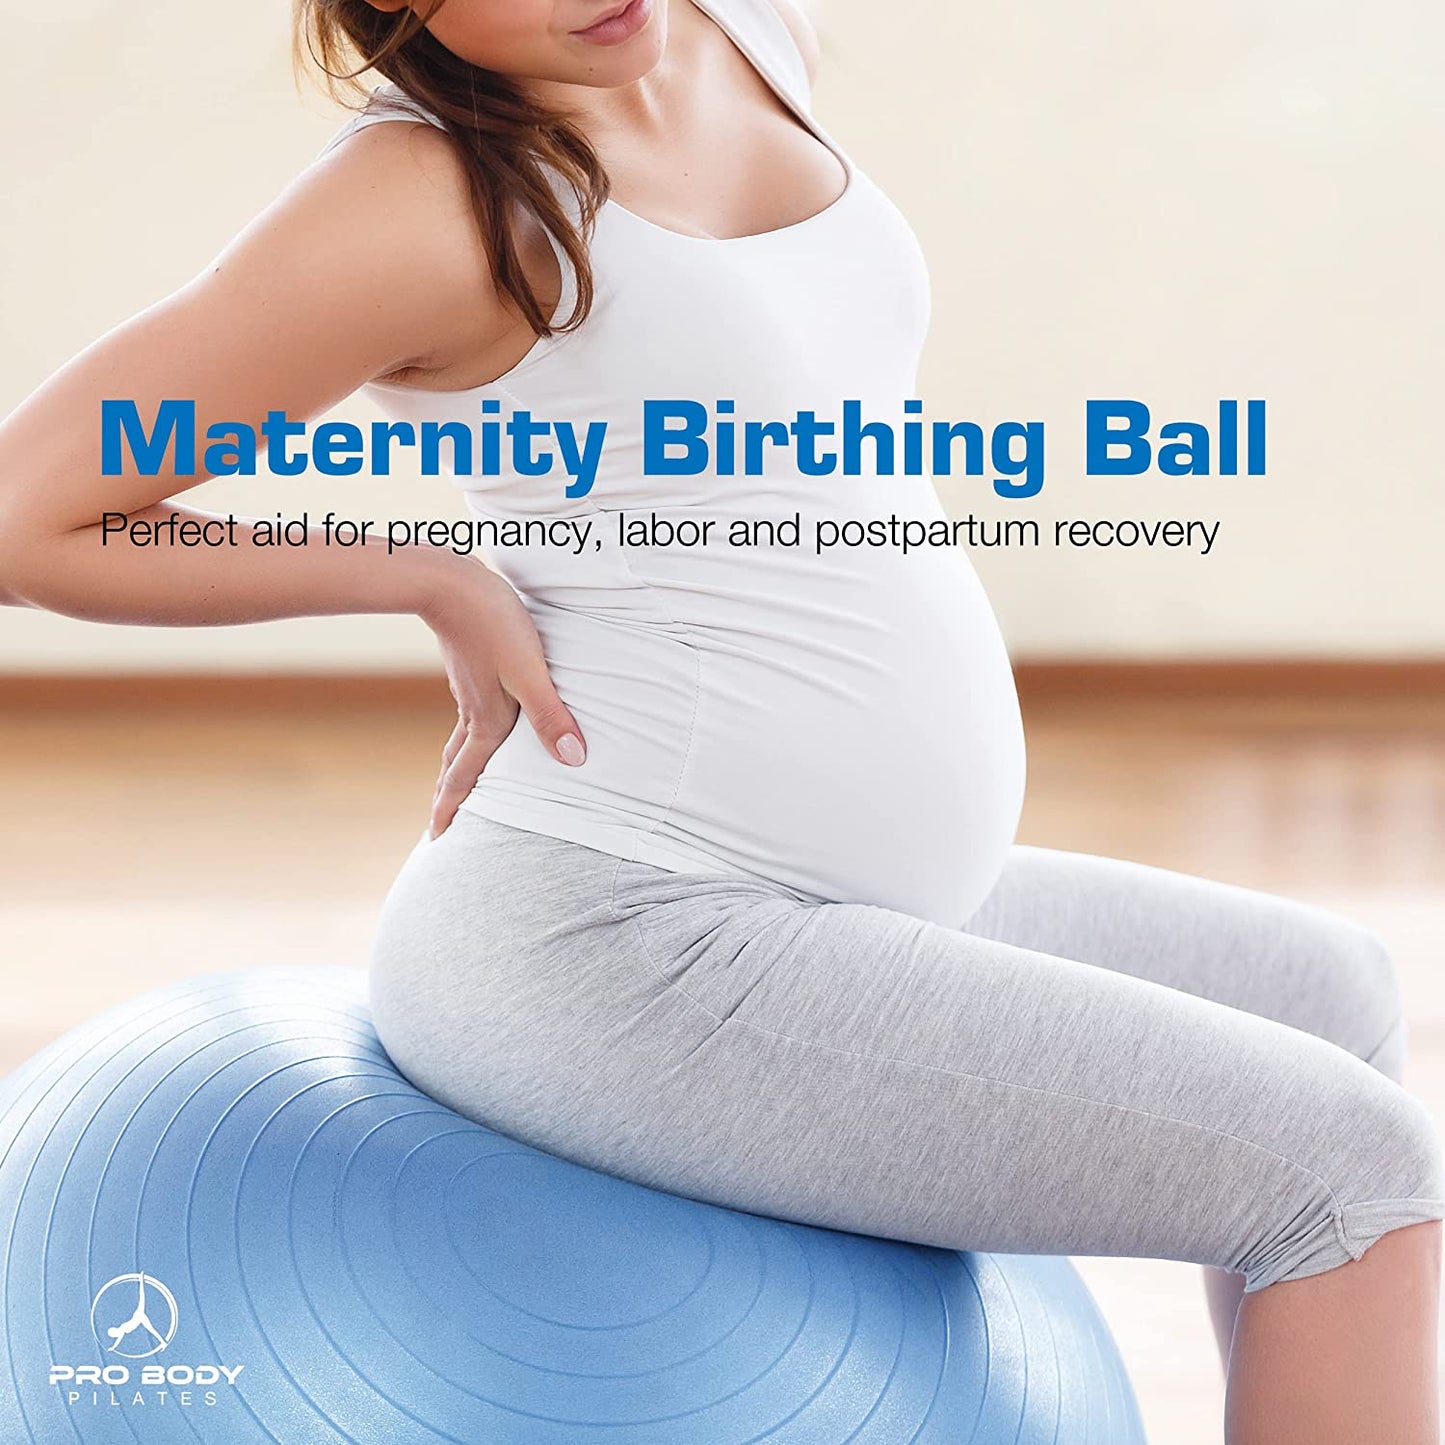 Yoga Ball for Pregnancy, Fitness, Balance, Workout at Home, Office and Physical Therapy (Mist)